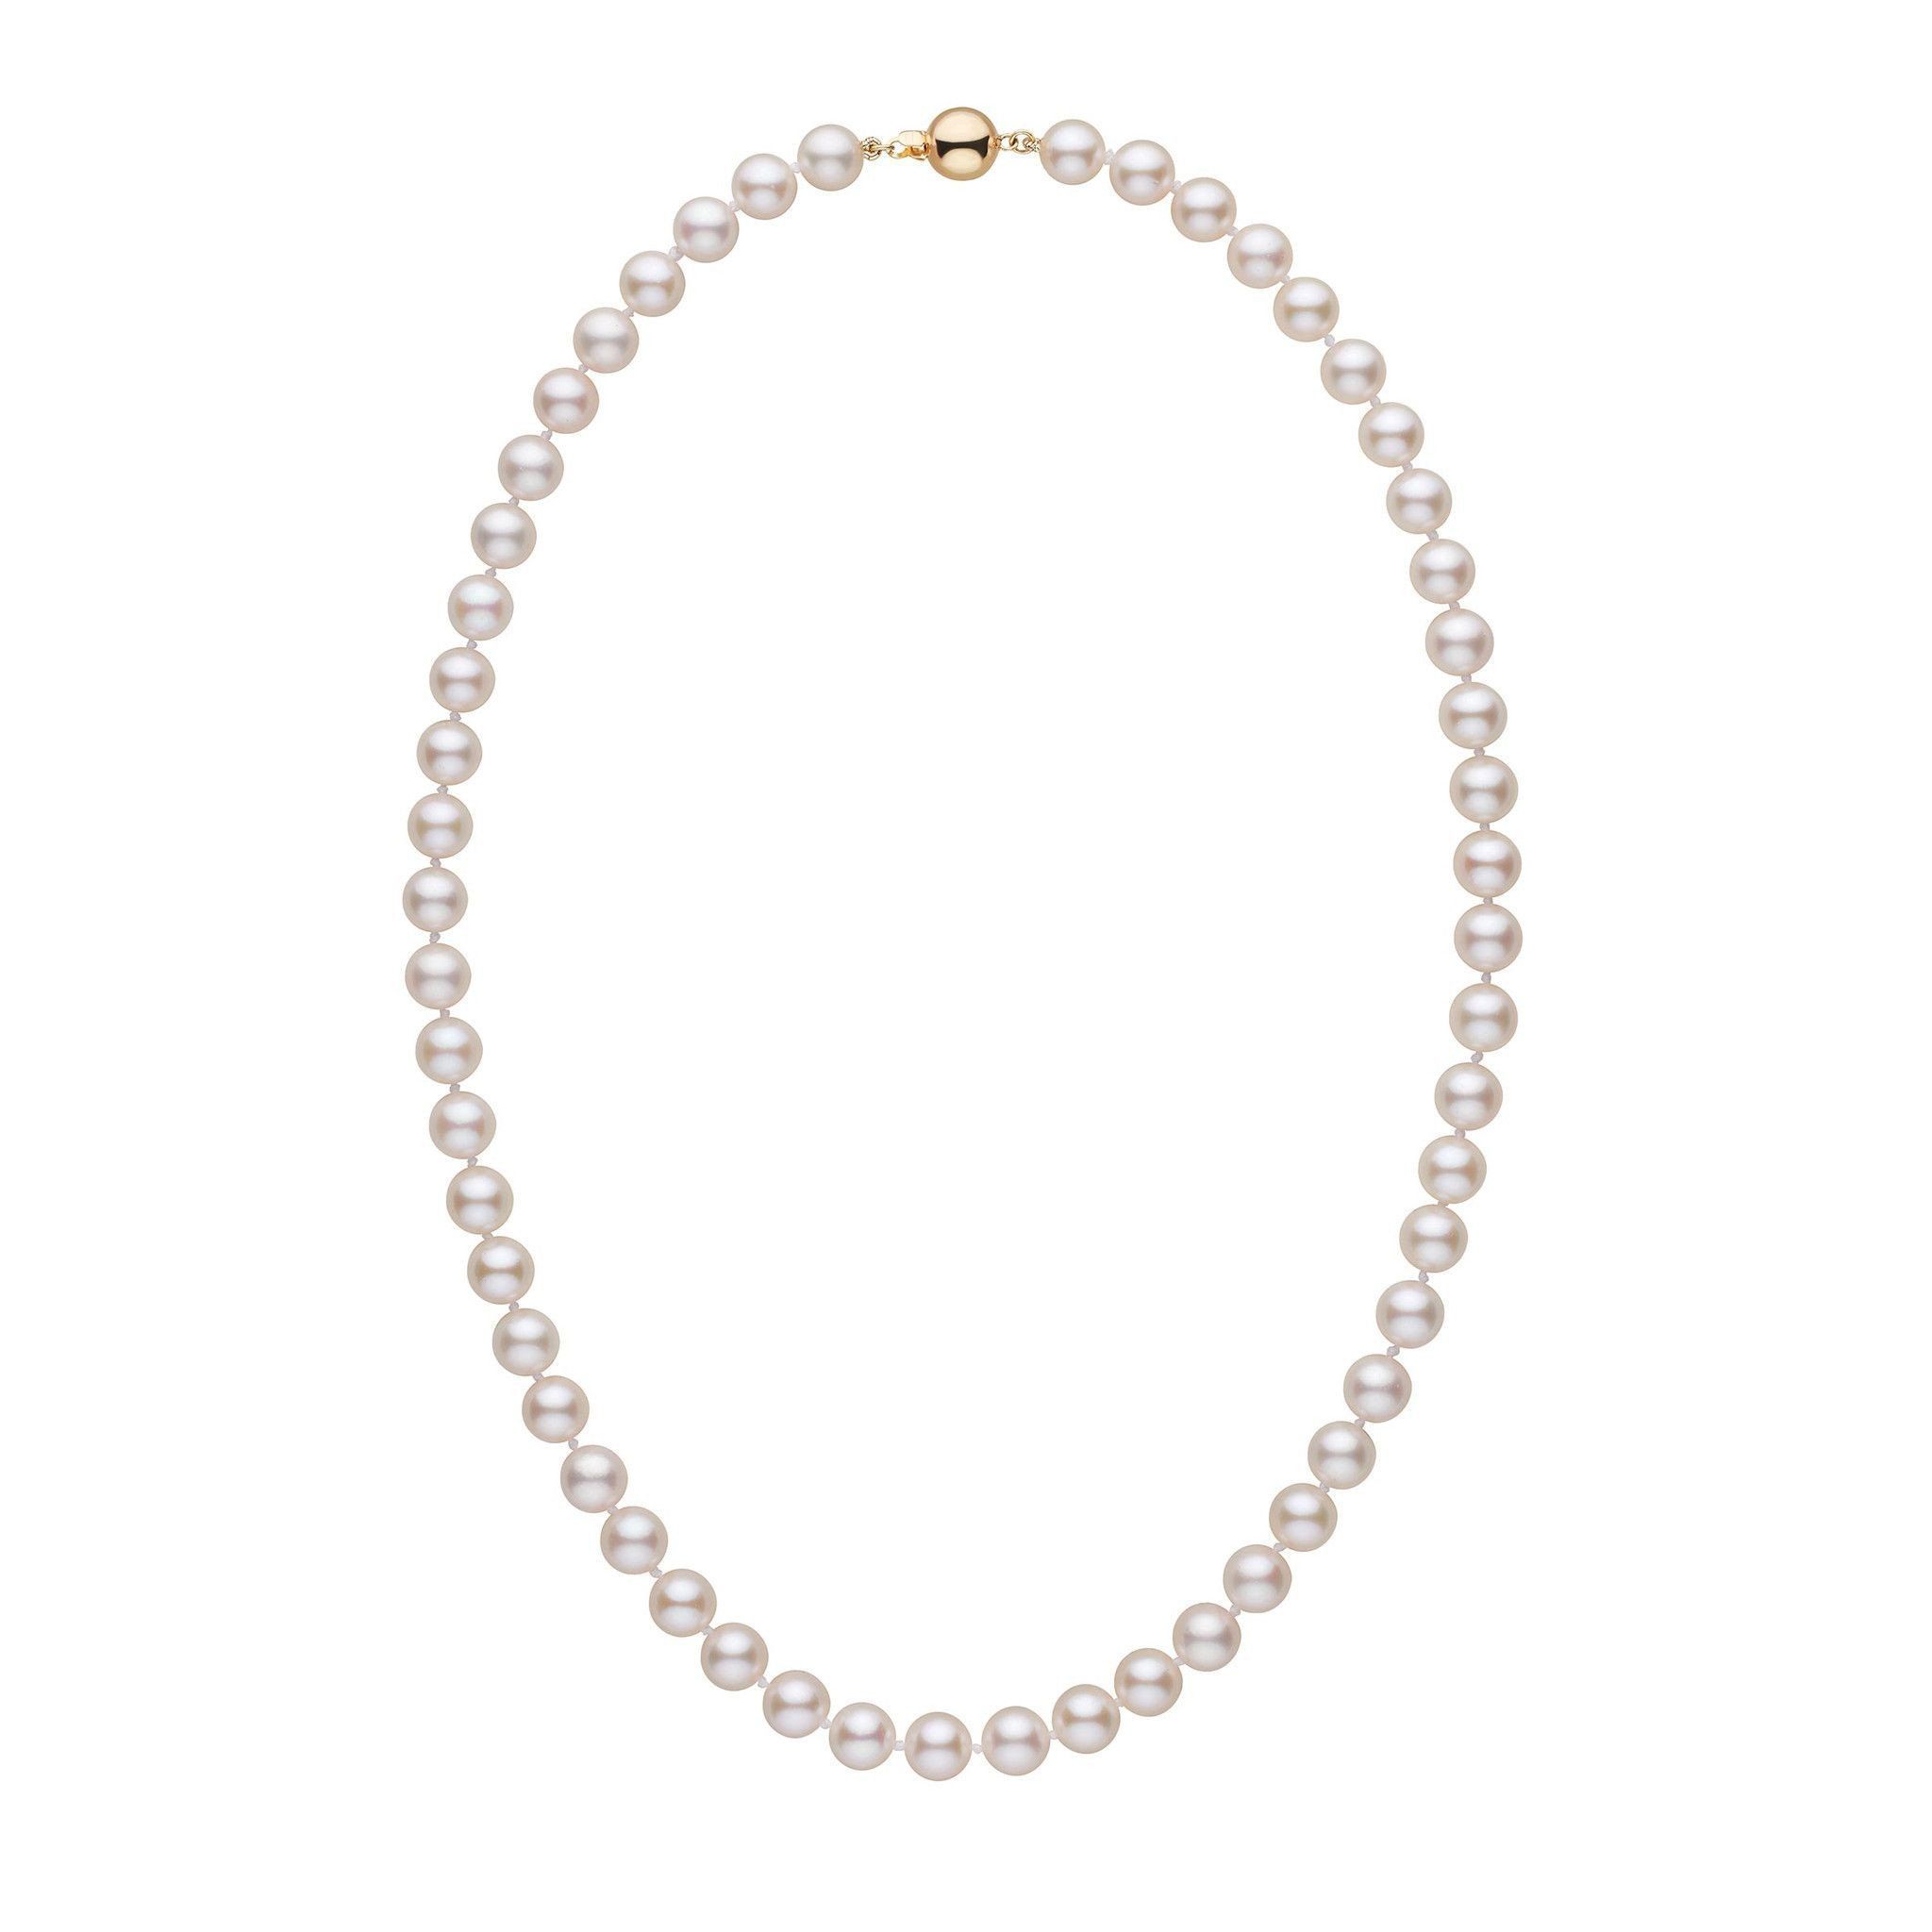 7.0-7.5 mm White Akoya 18 inch AA+ Pearl Necklace yellow gold